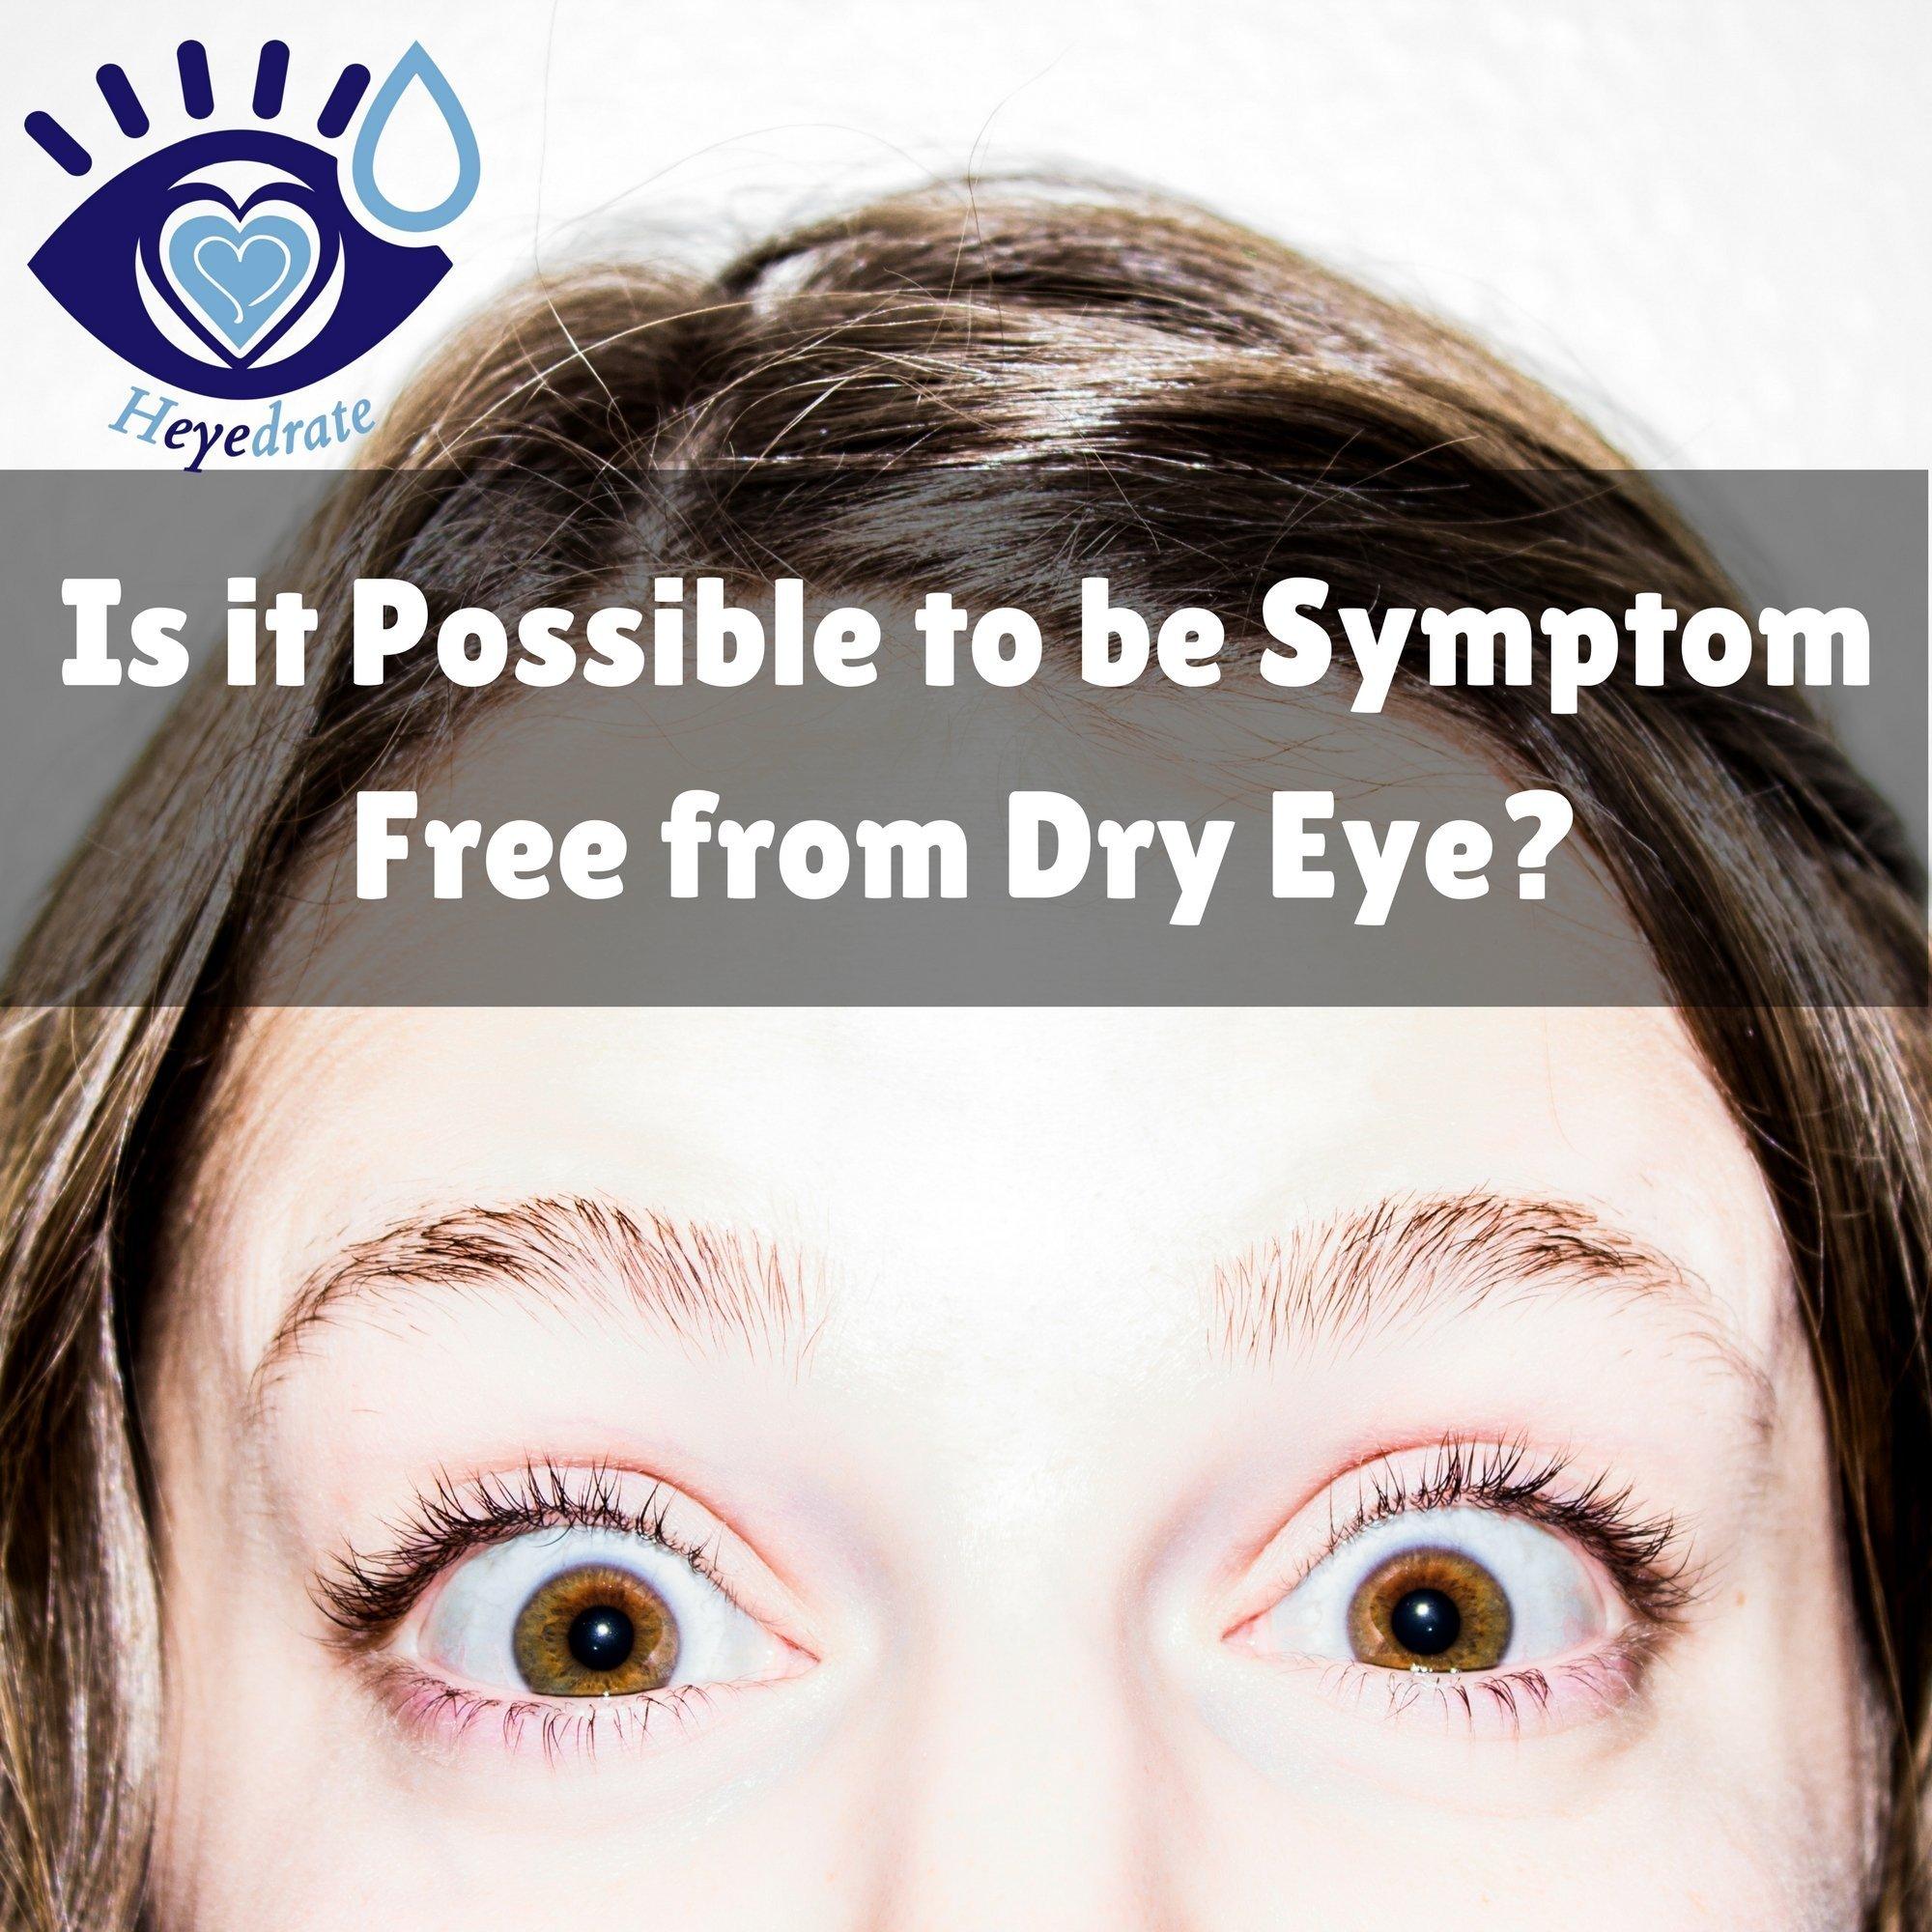 Is it Possible to be Symptom Free from Dry Eye?